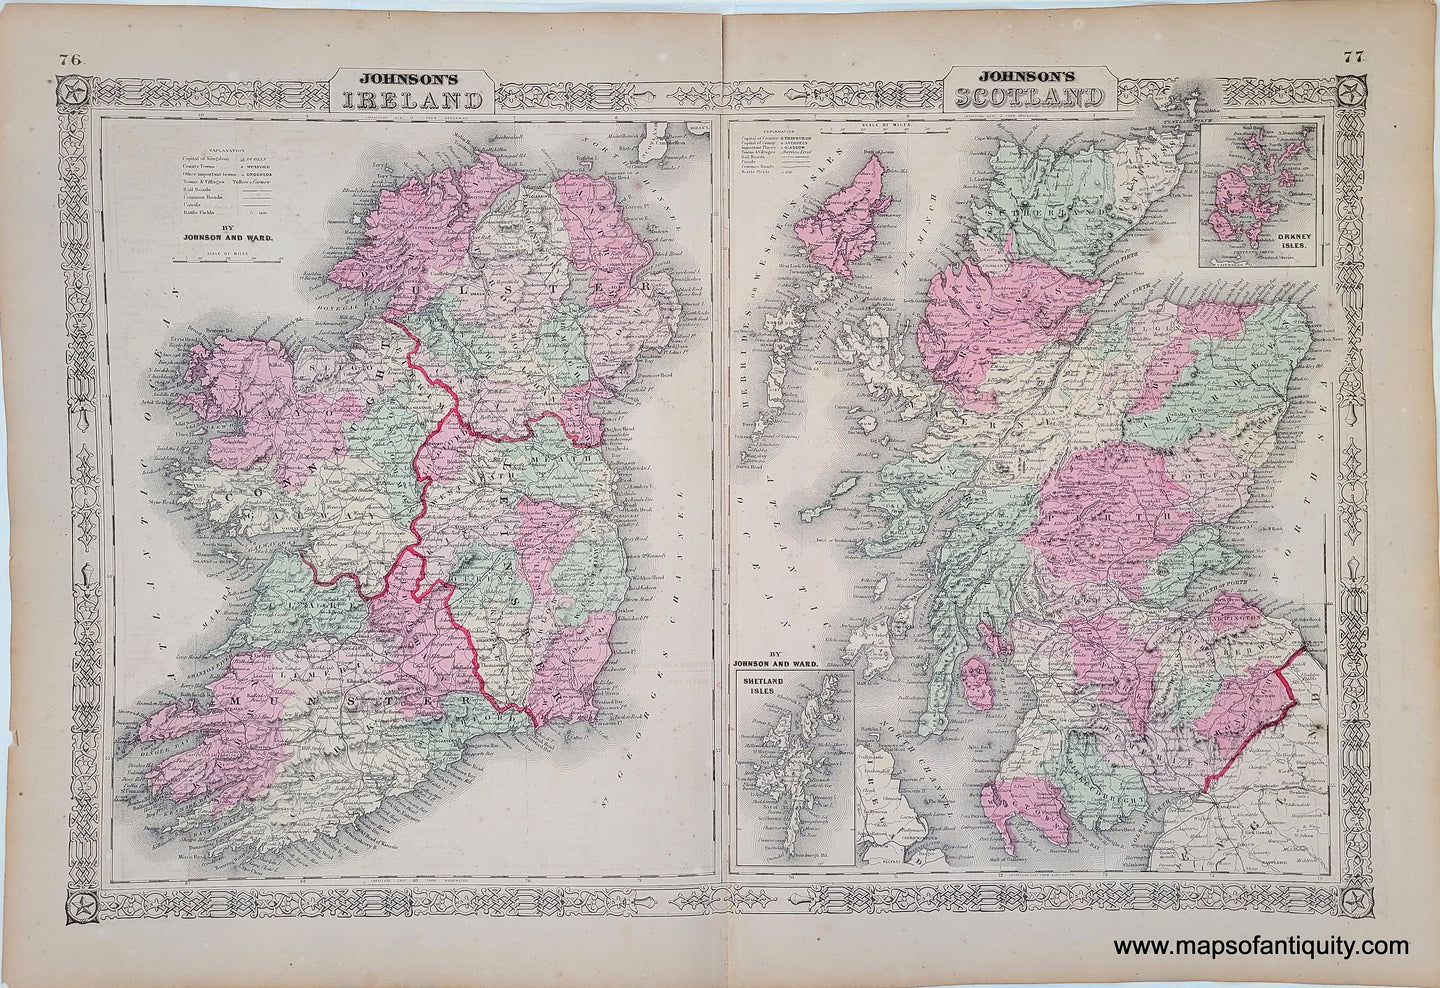 Antique-Hand-Colored-Map-Johnson's-Ireland-Johnson's-Scotland--Europe-Ireland-1864-Johnson-and-Ward-Maps-Of-Antiquity